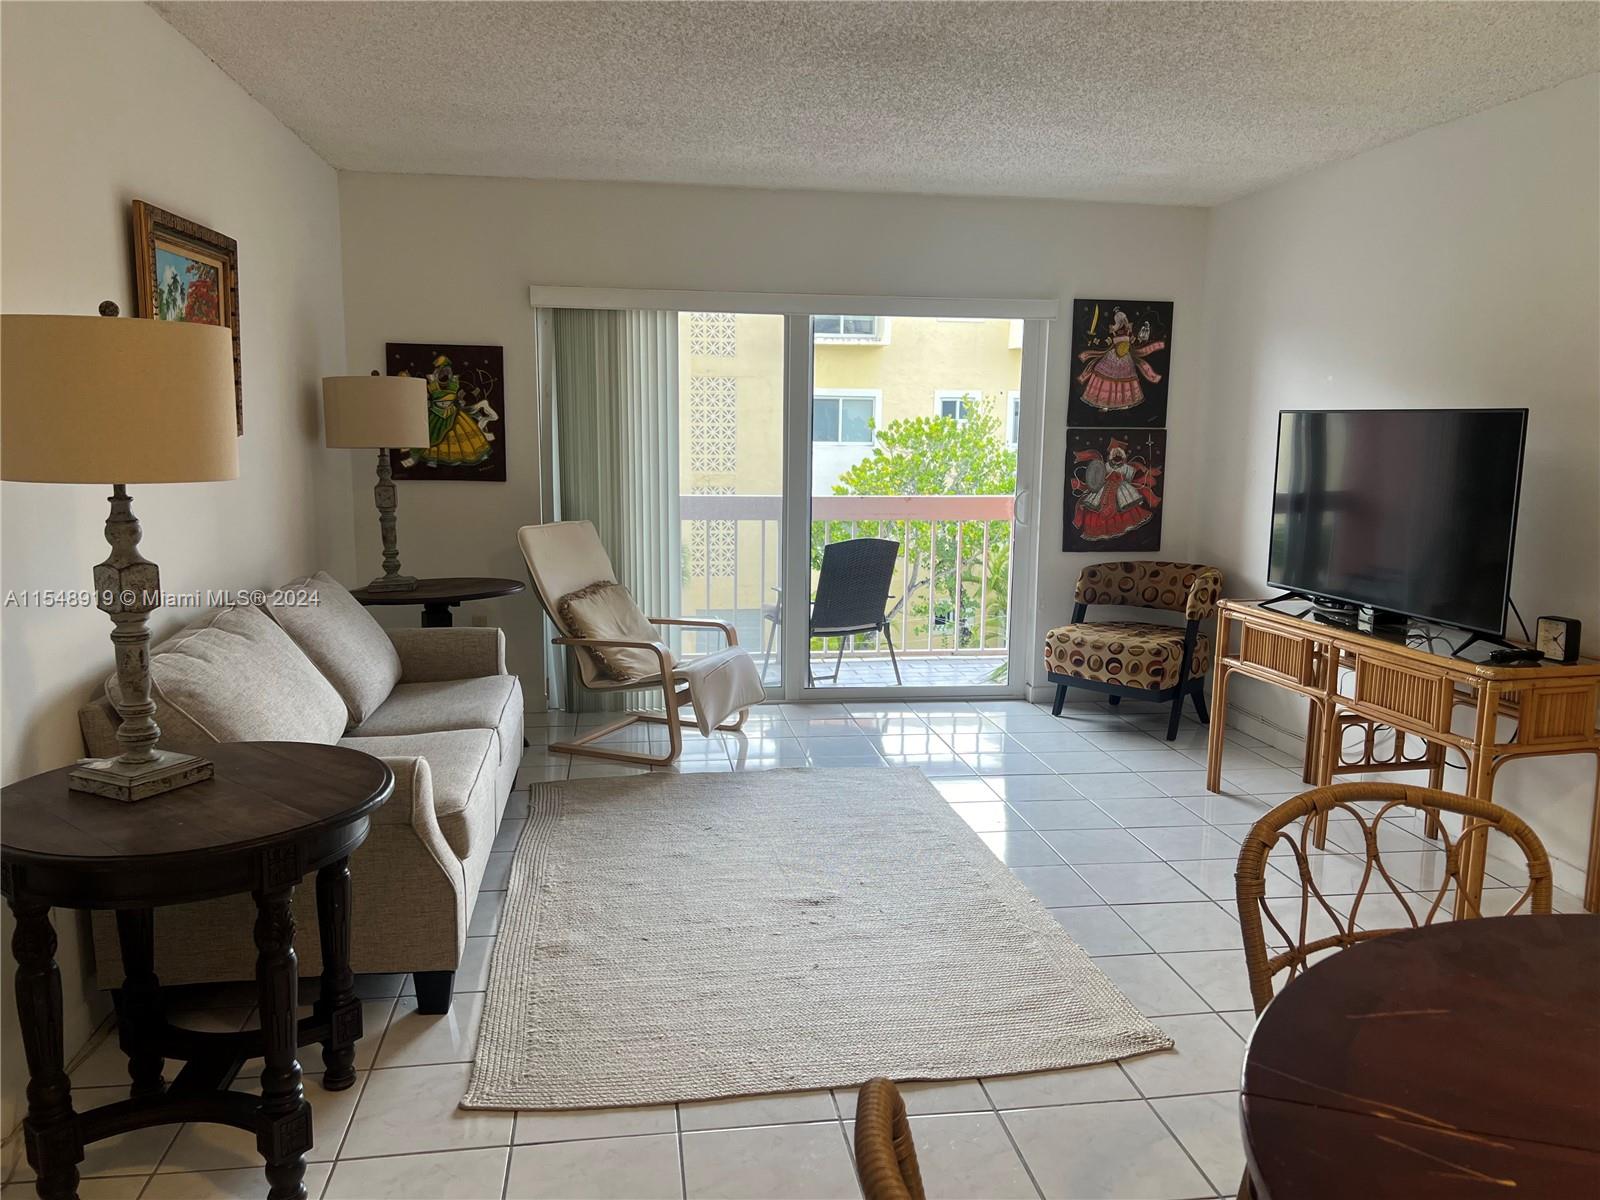 Wonderful 1 bedroom/1 bath on the 3rd floor in the coveted Kings Creek! Very well maintained community and great location close to Dadeland, Palmetto, US1 and Baptist Hospital.